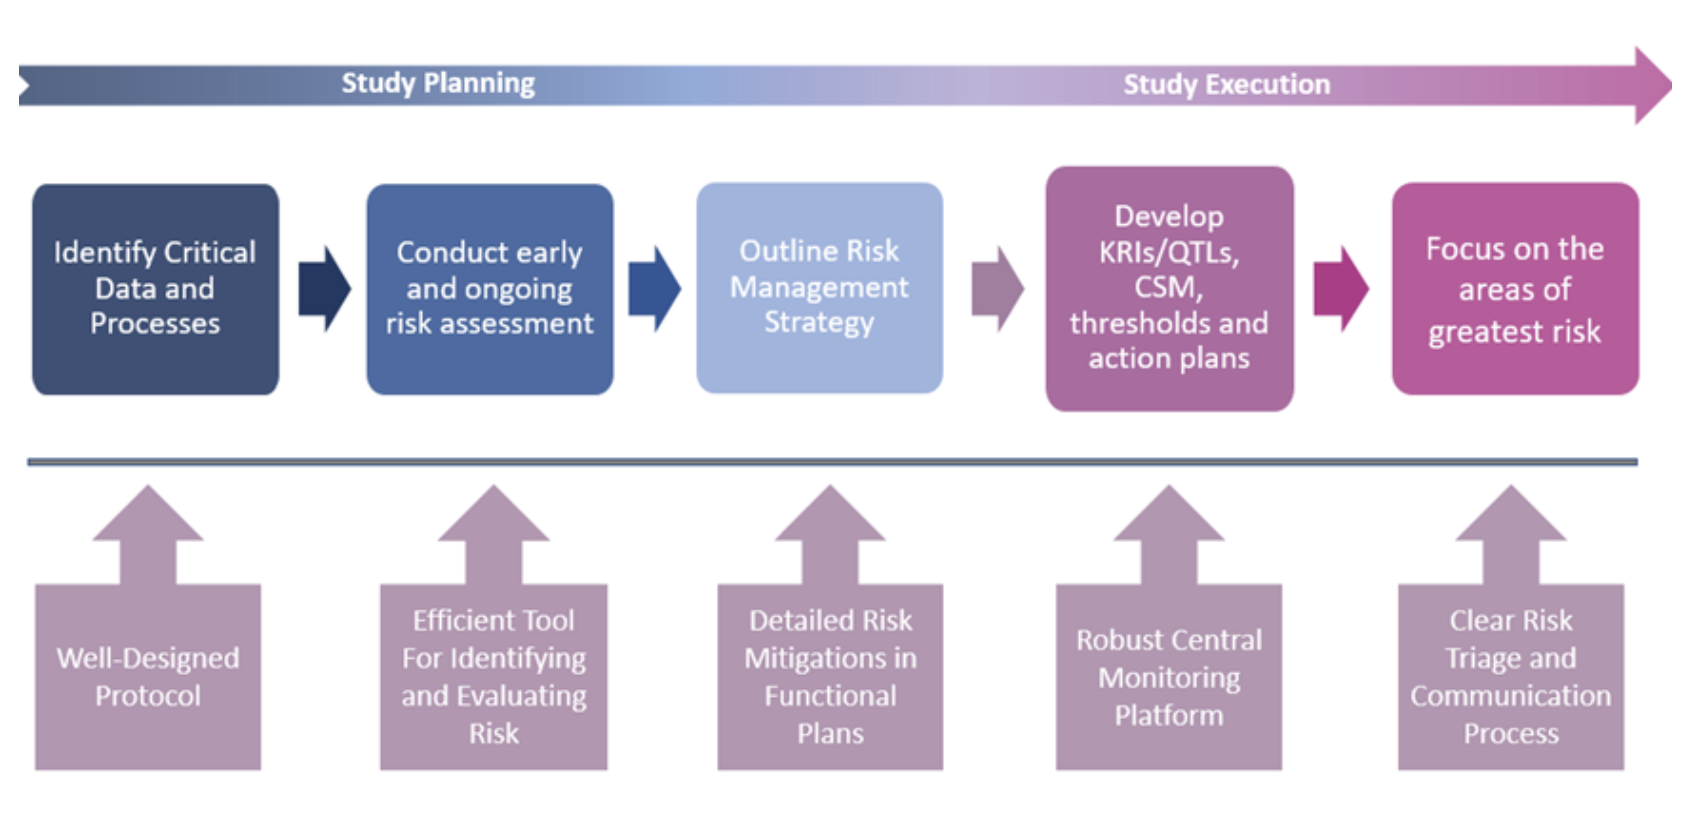 The Centralized Statistical Monitoring Model